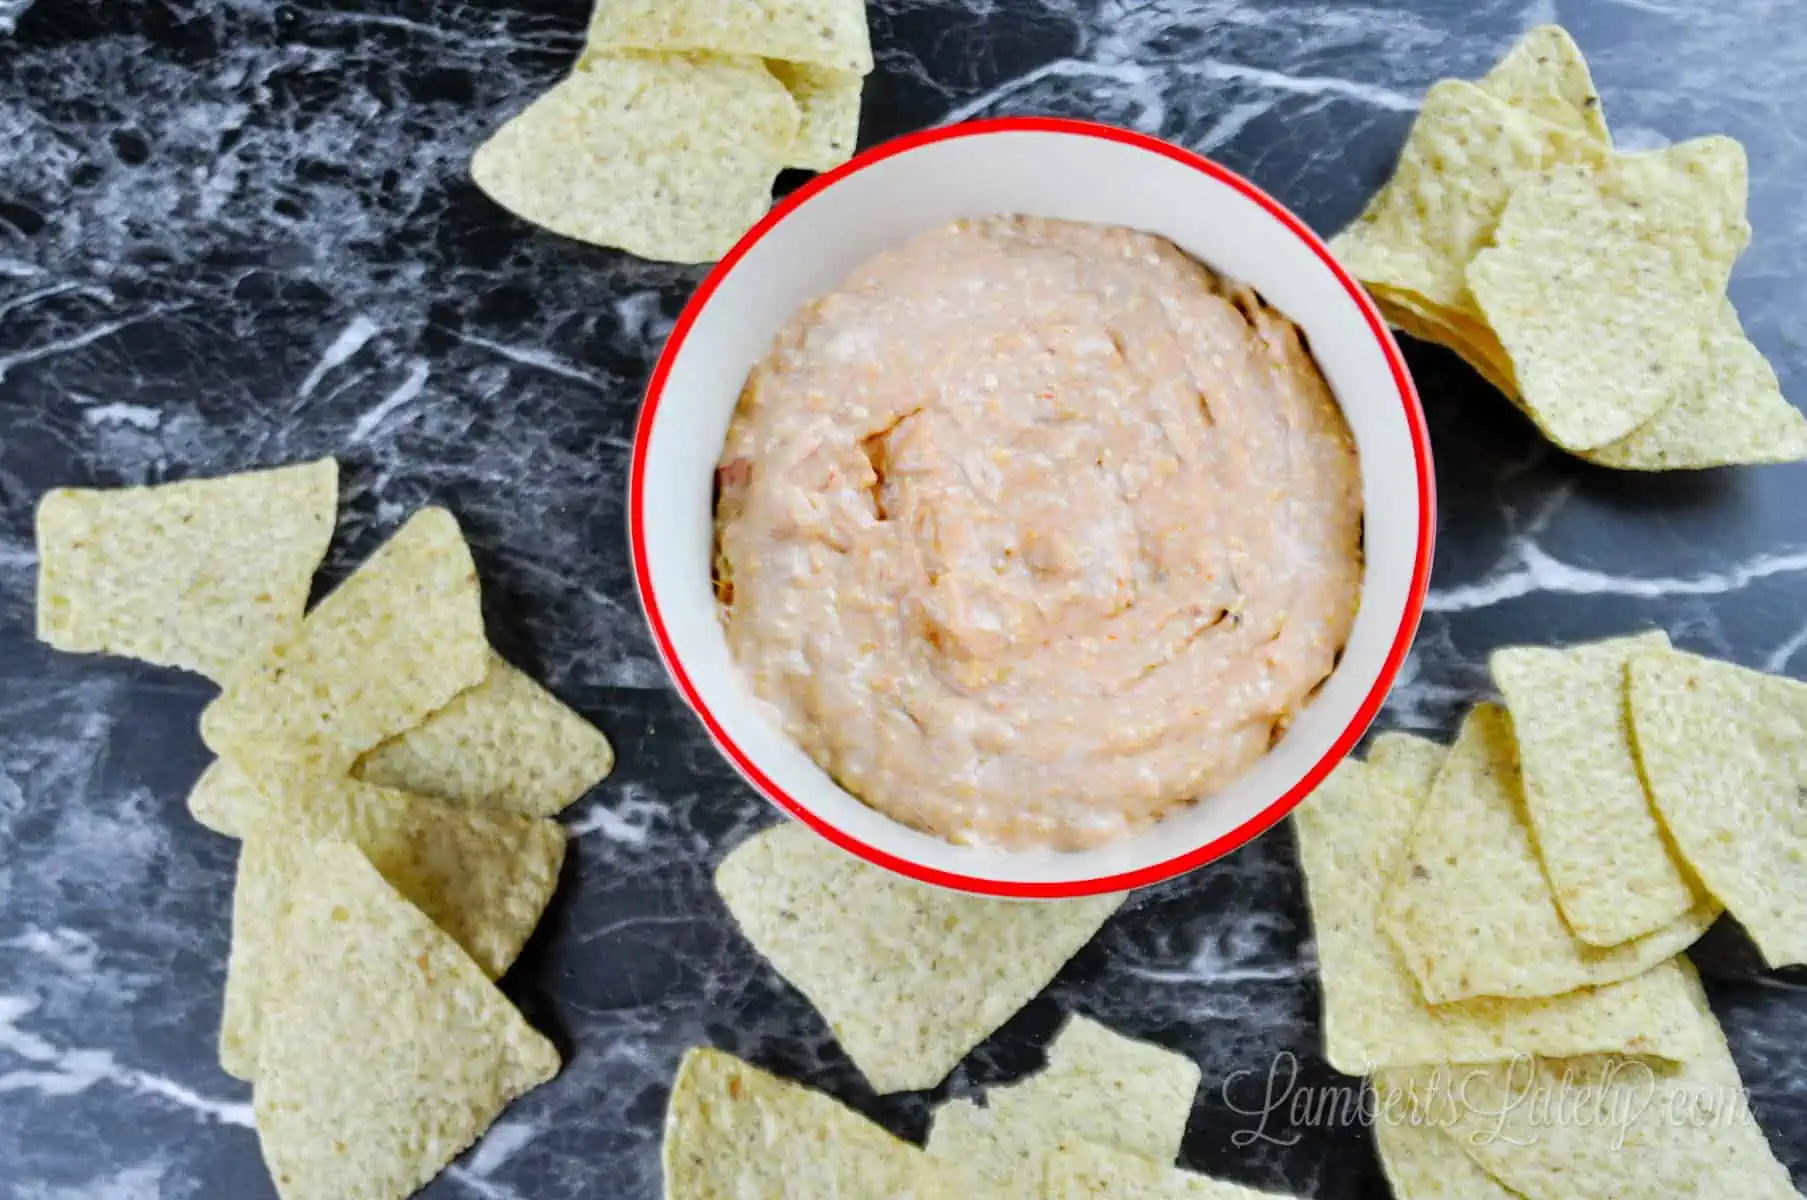 cream cheese and salsa dip with chips.